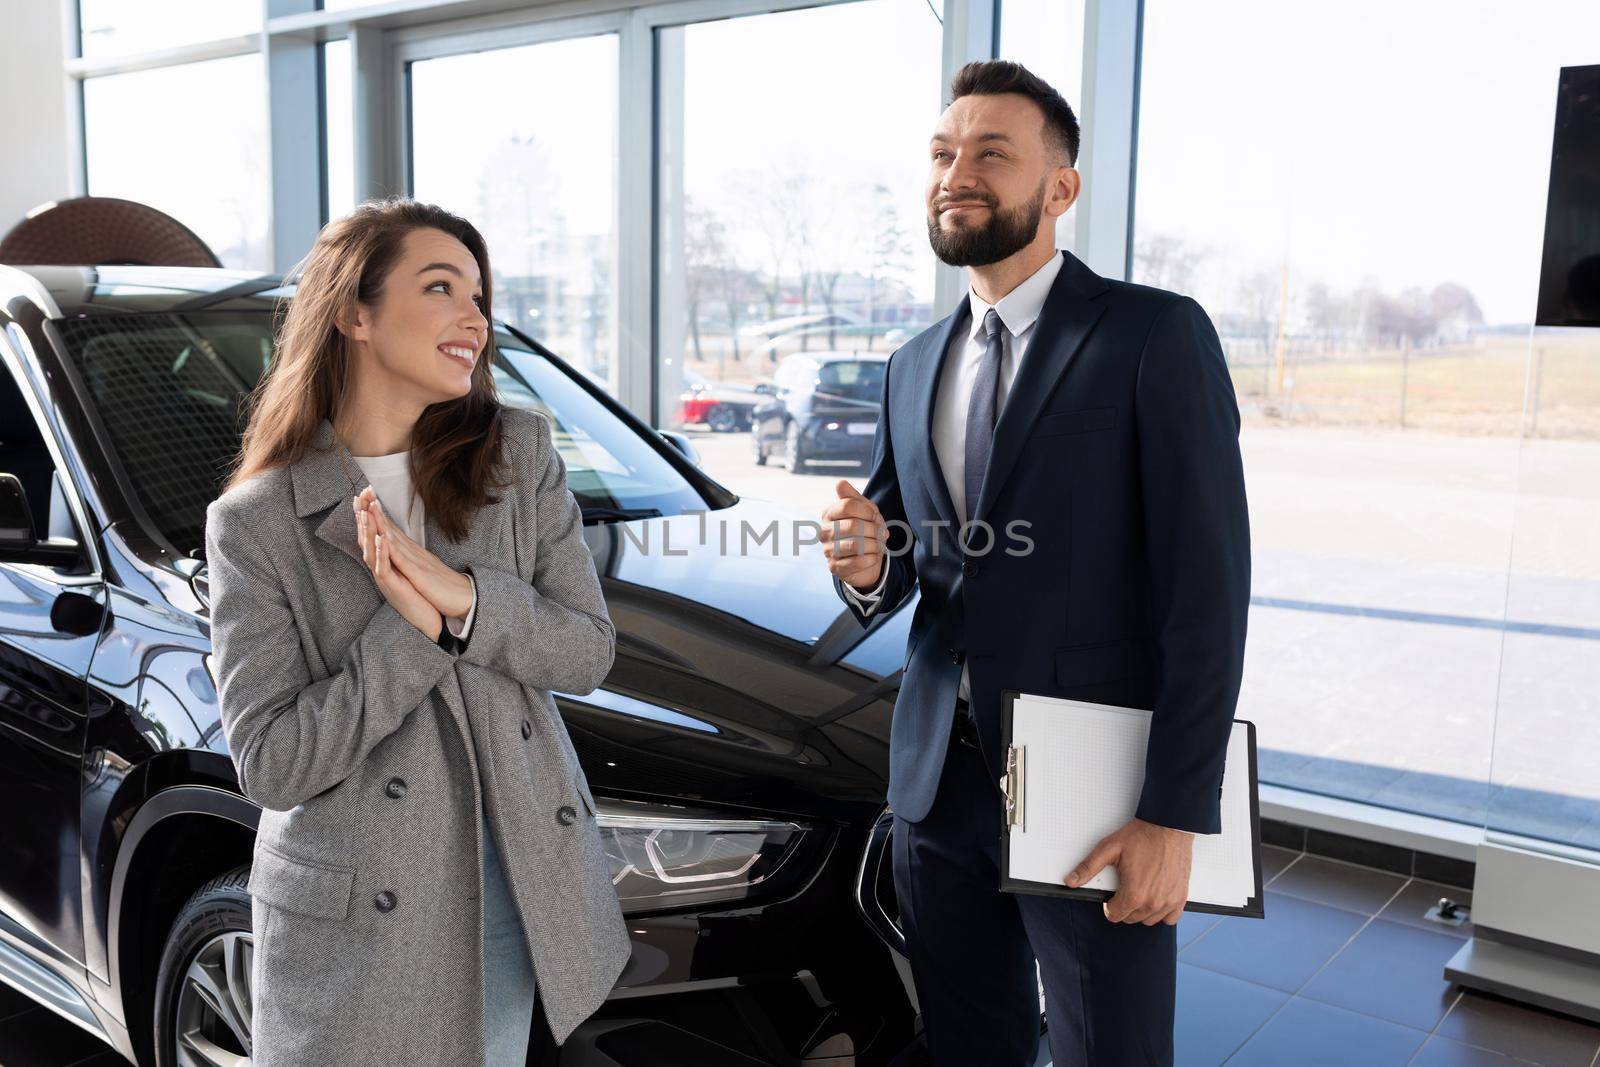 a woman buyer asks for a discount on a new car from an employee of the car showroom of the dealership.